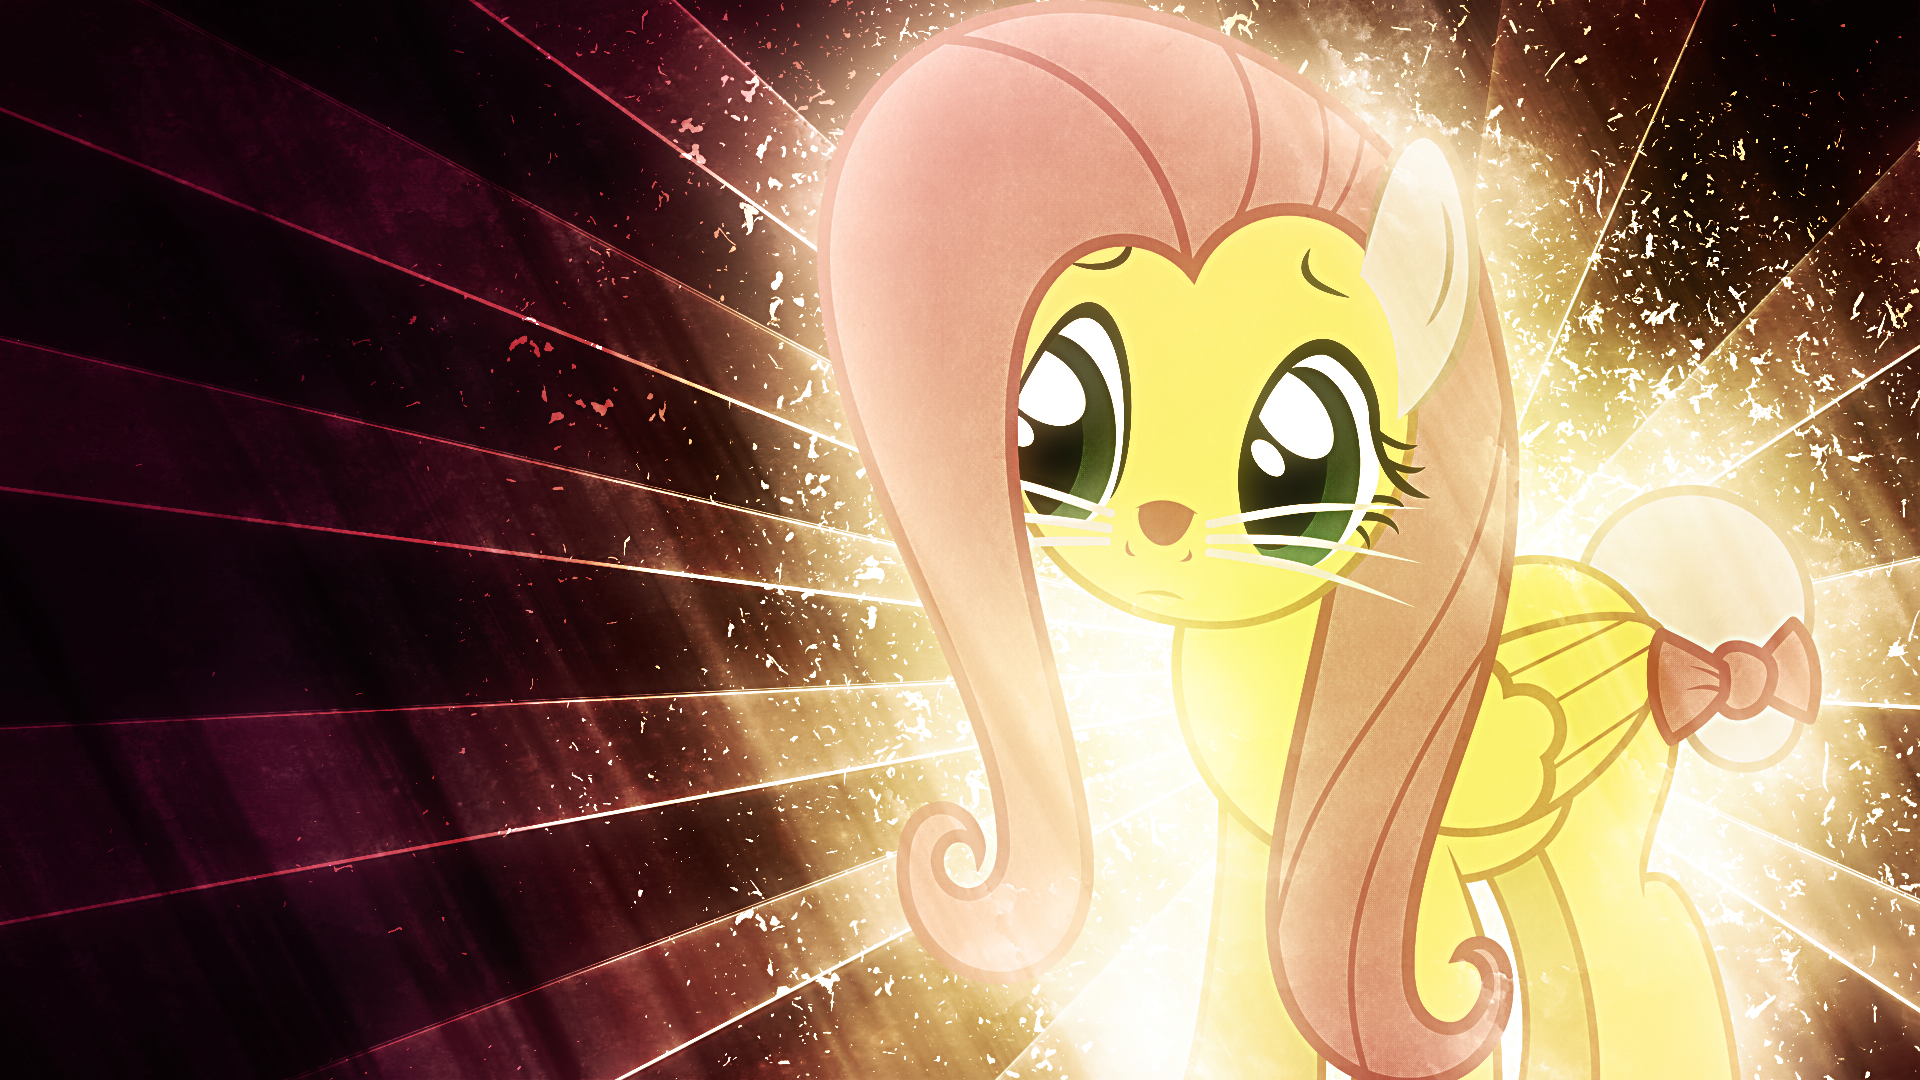 Flutterbunny - Wallpaper by Foxy-Noxy and Tzolkine